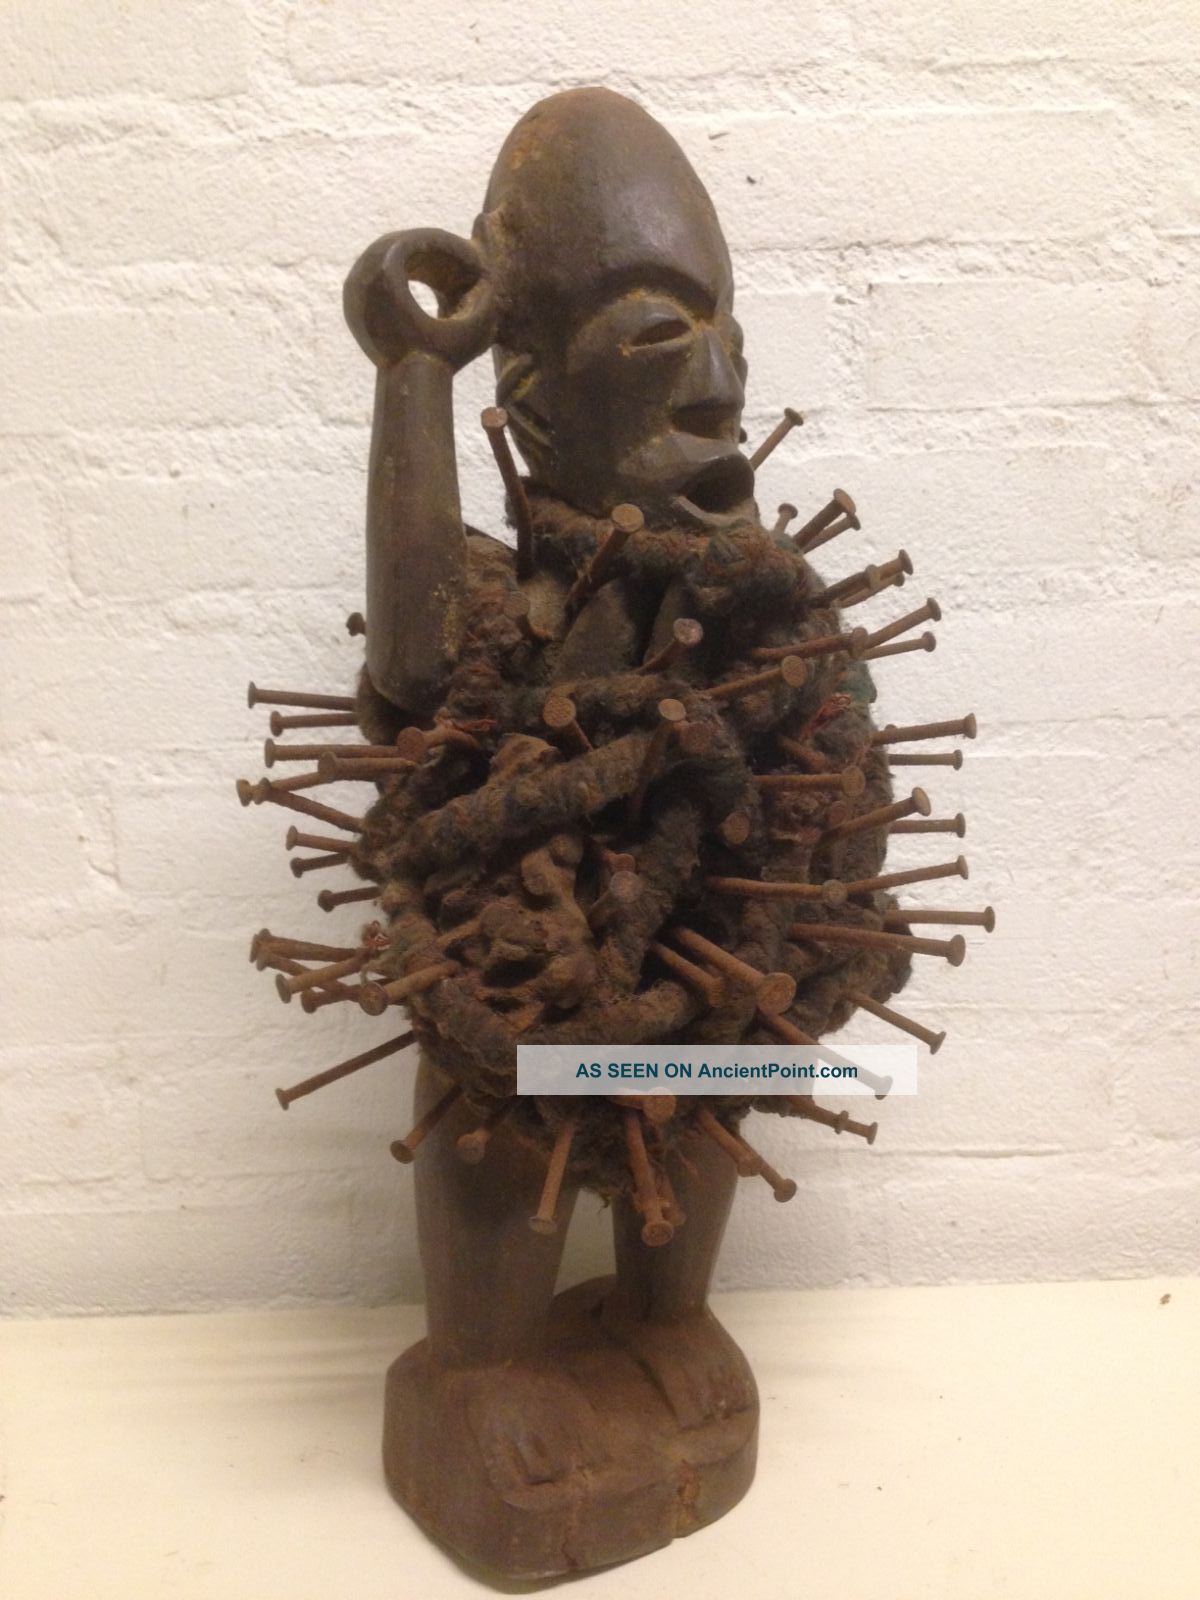 Congo: Old And Tribal African Bakongo Figure Or Statue - 47 Cm. Sculptures & Statues photo